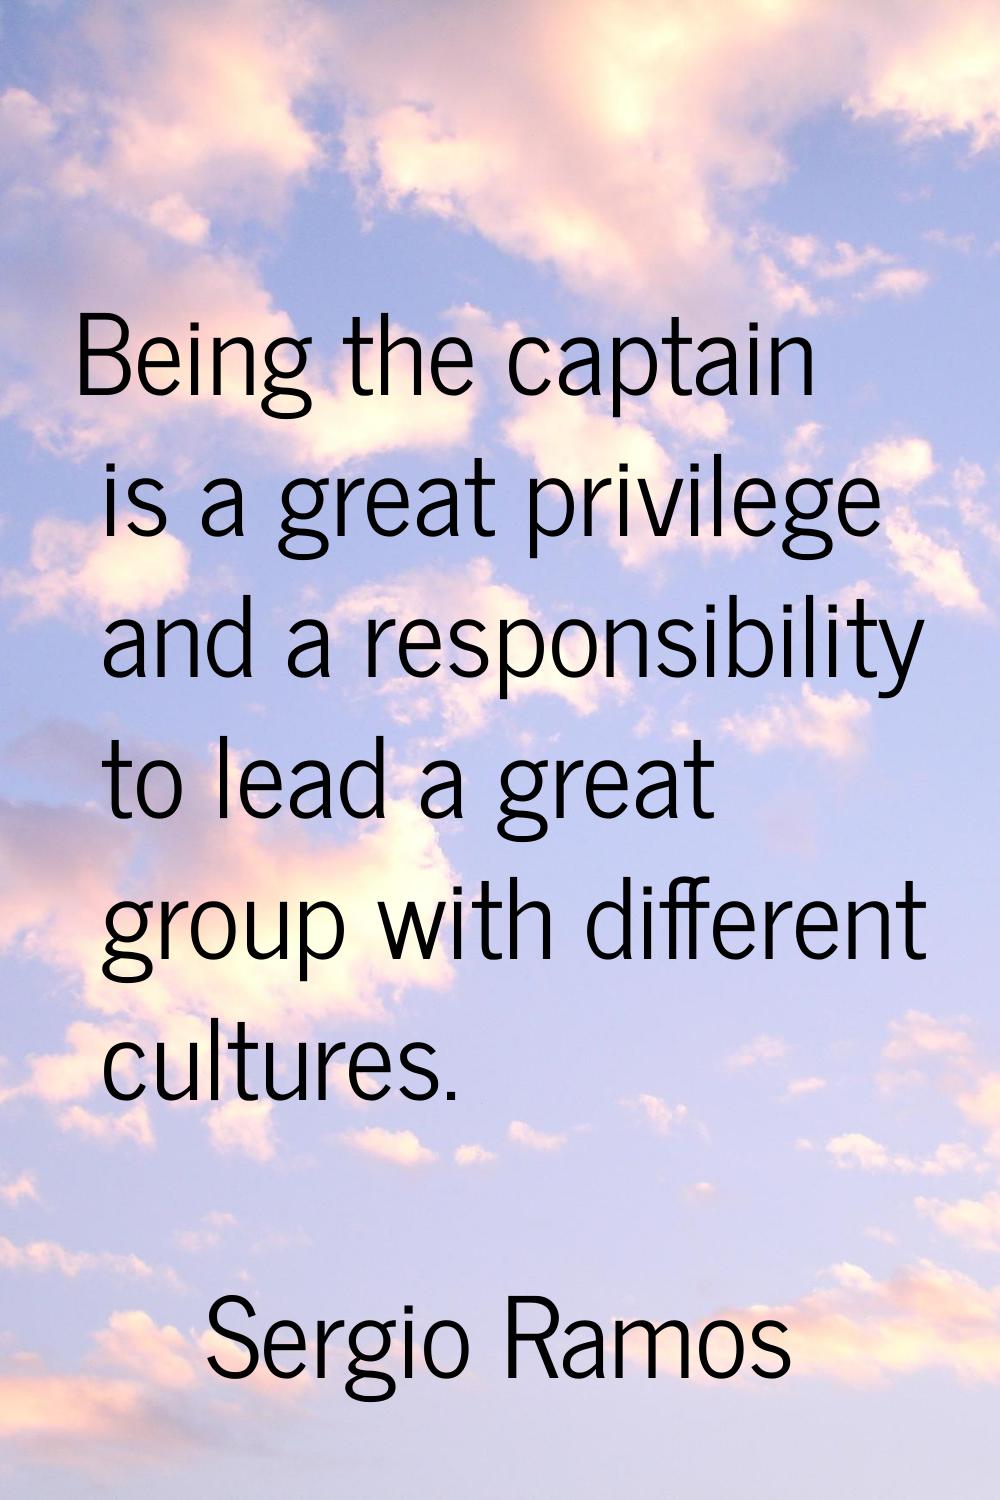 Being the captain is a great privilege and a responsibility to lead a great group with different cu